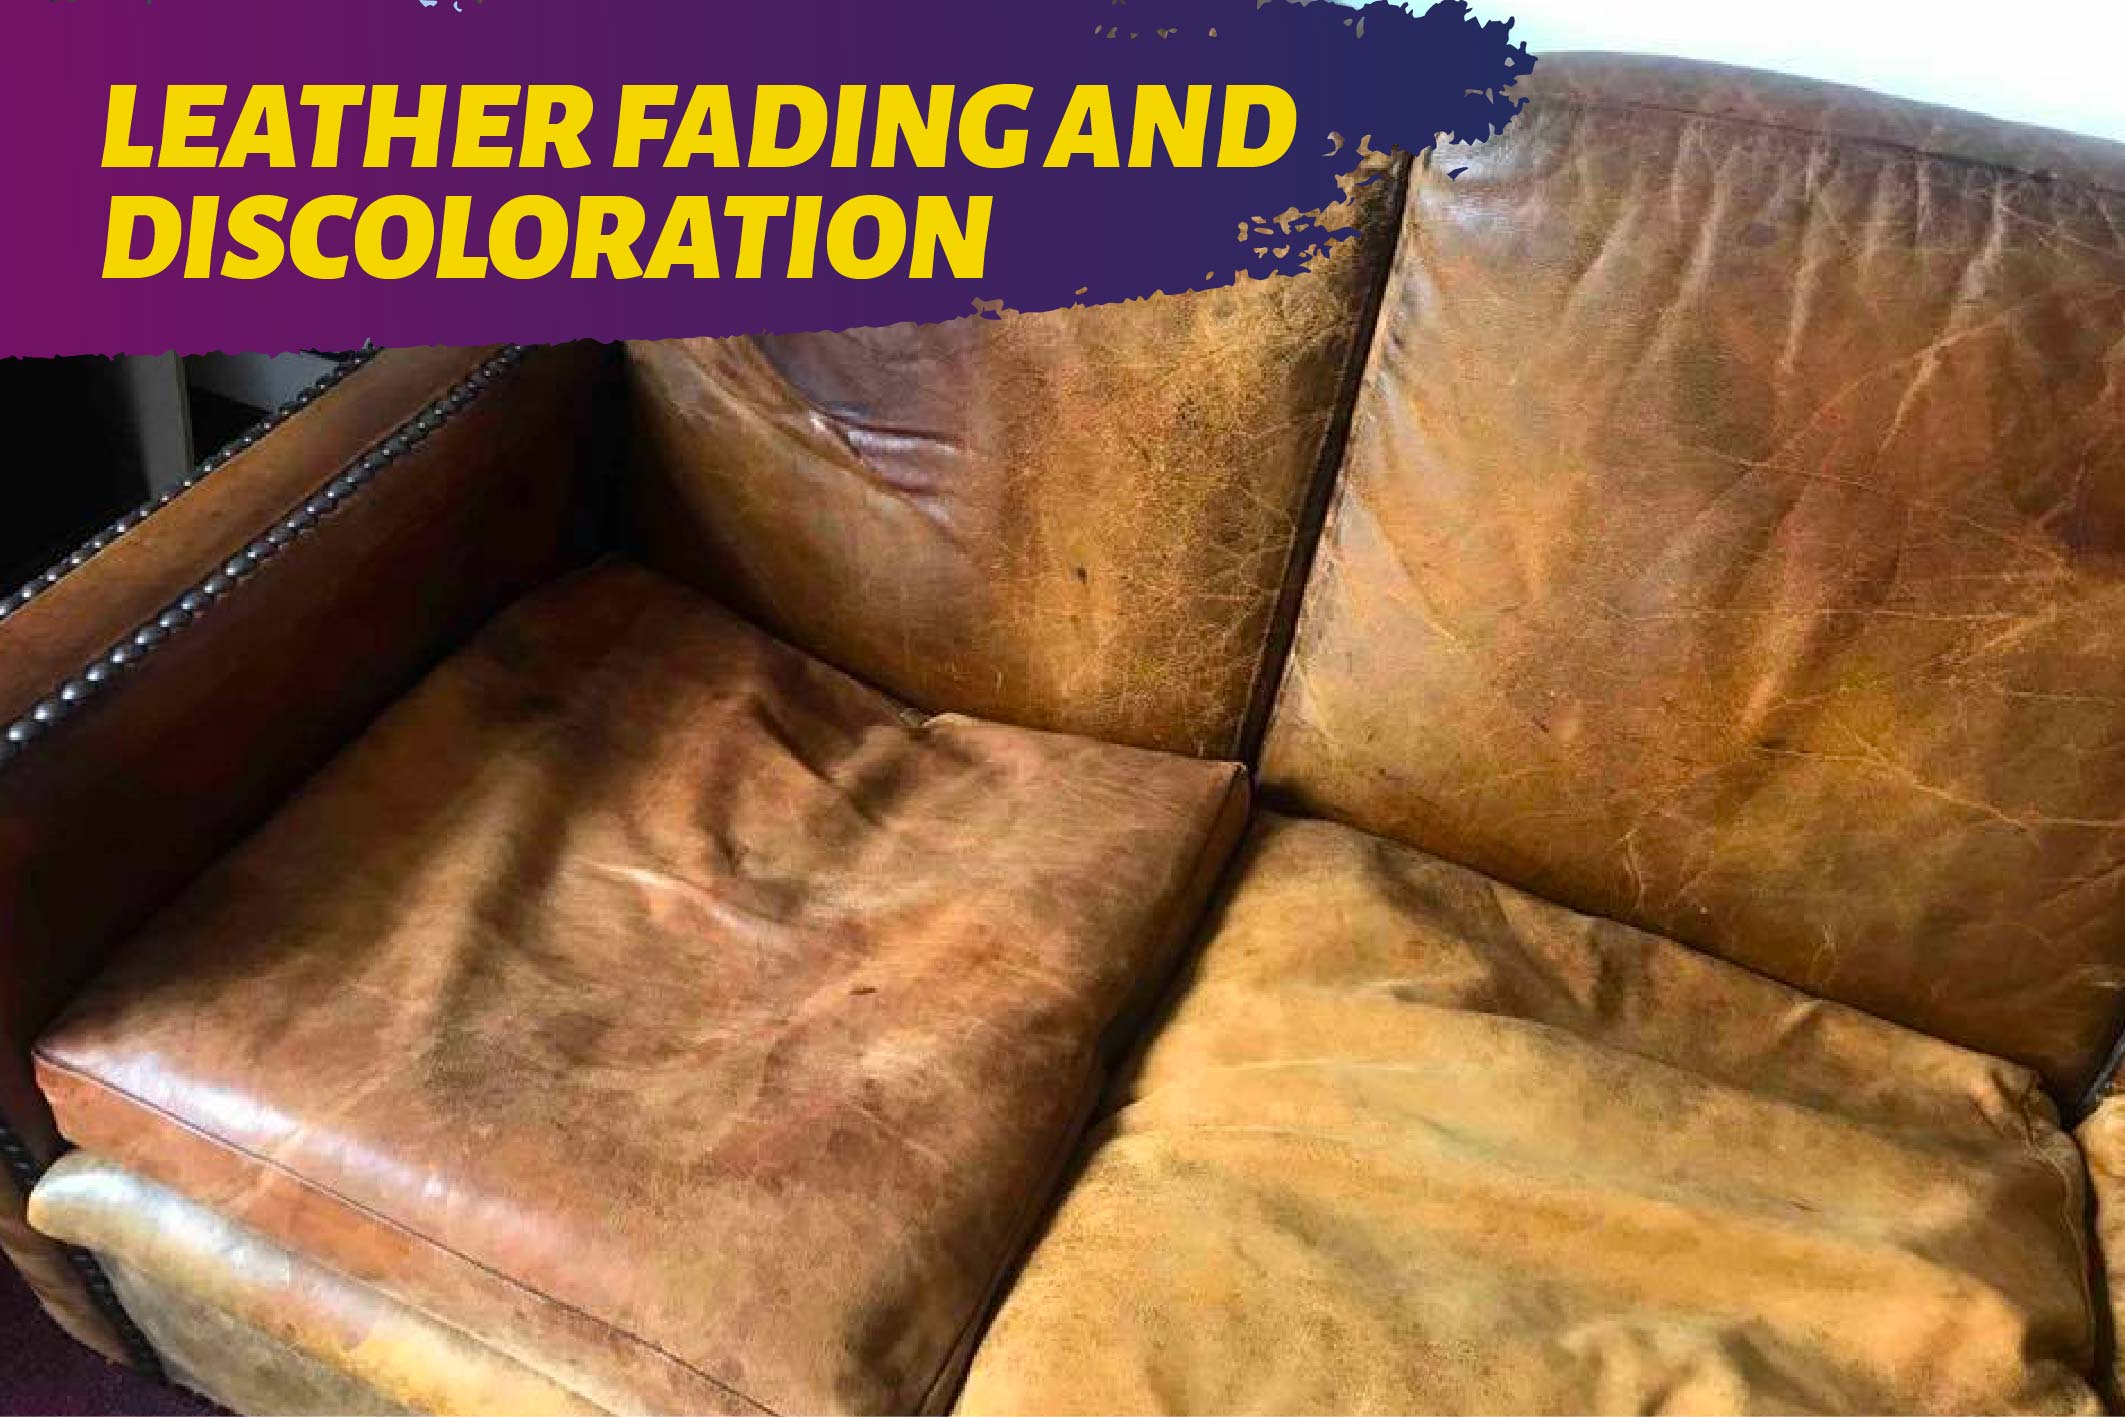 Leather Fading, Stains, and Discoloration